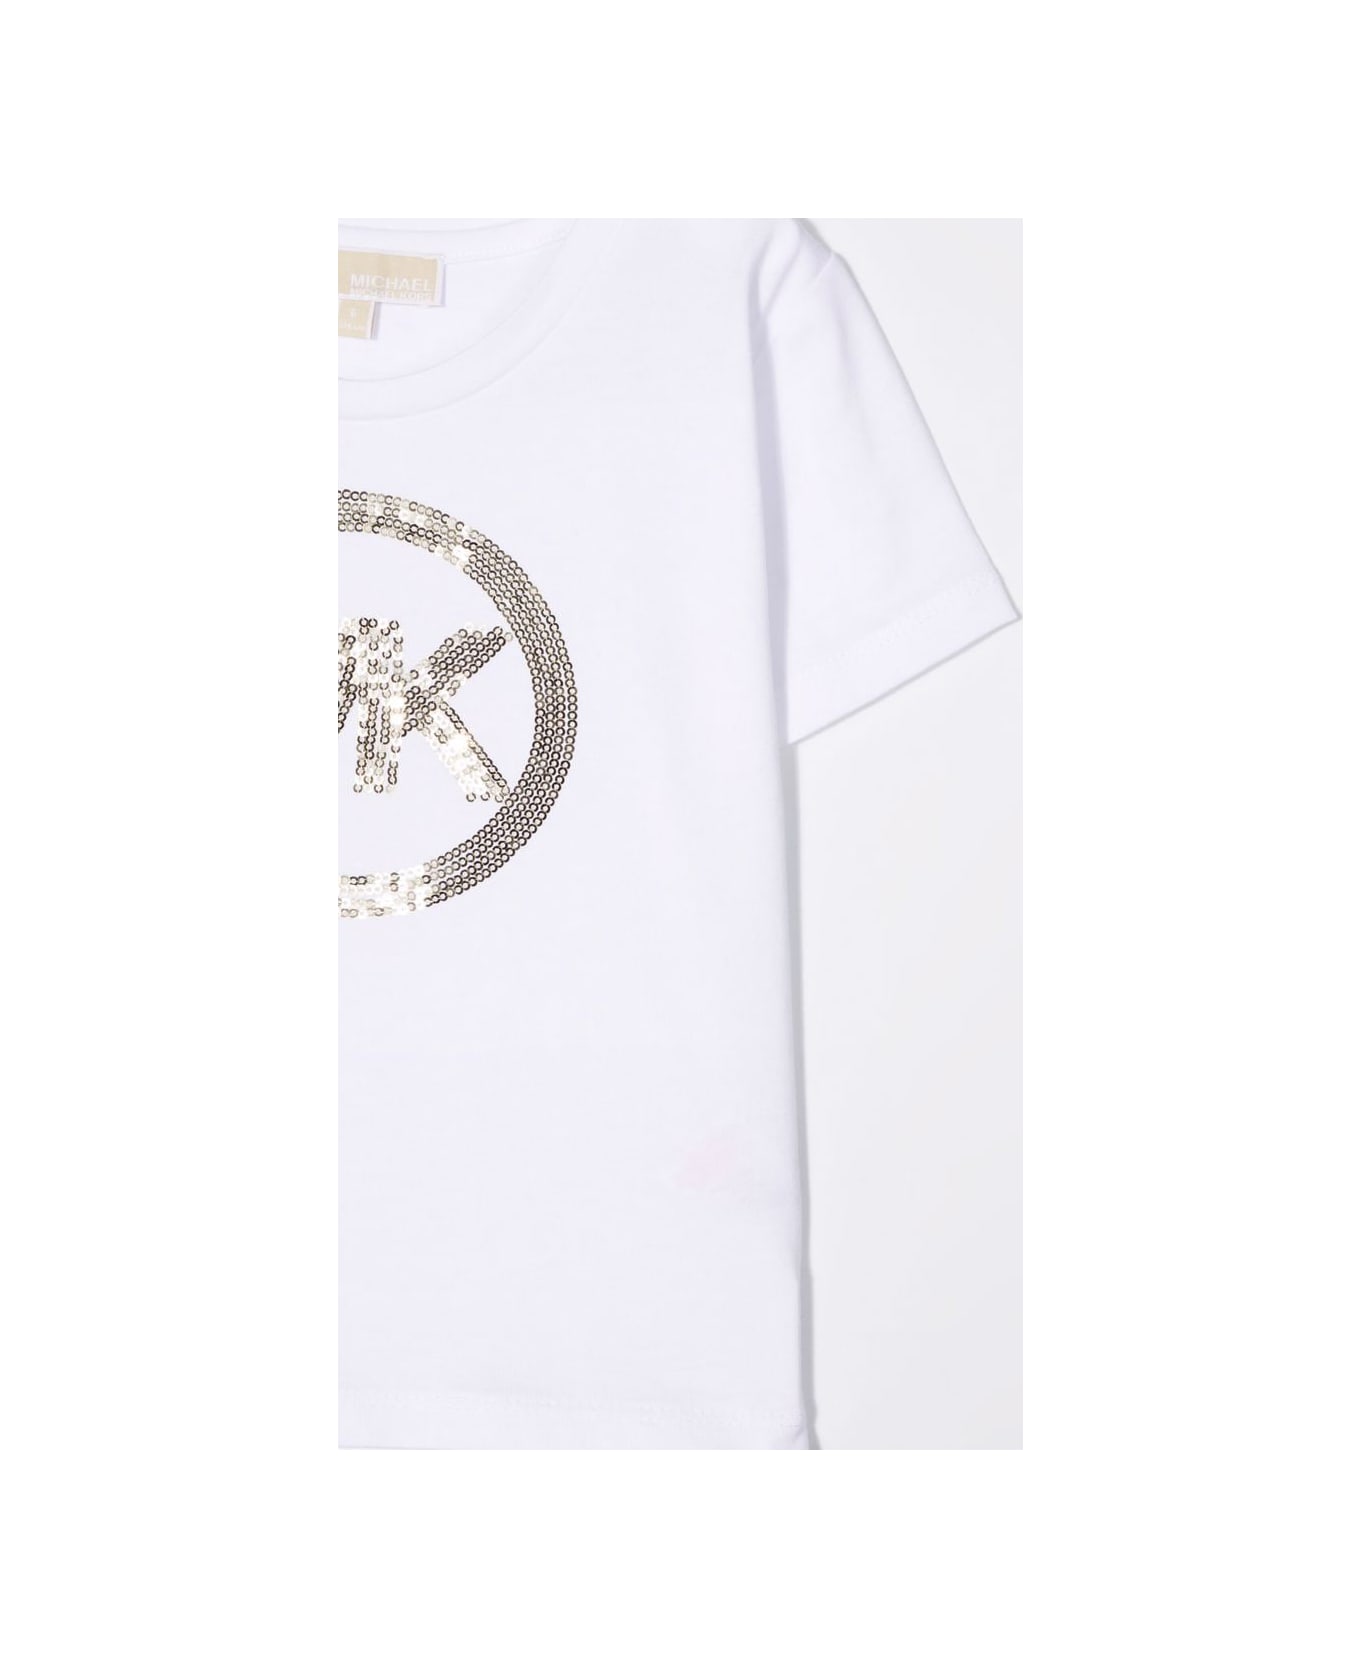 Michael Kors T-shirt With Sequins - WHITE